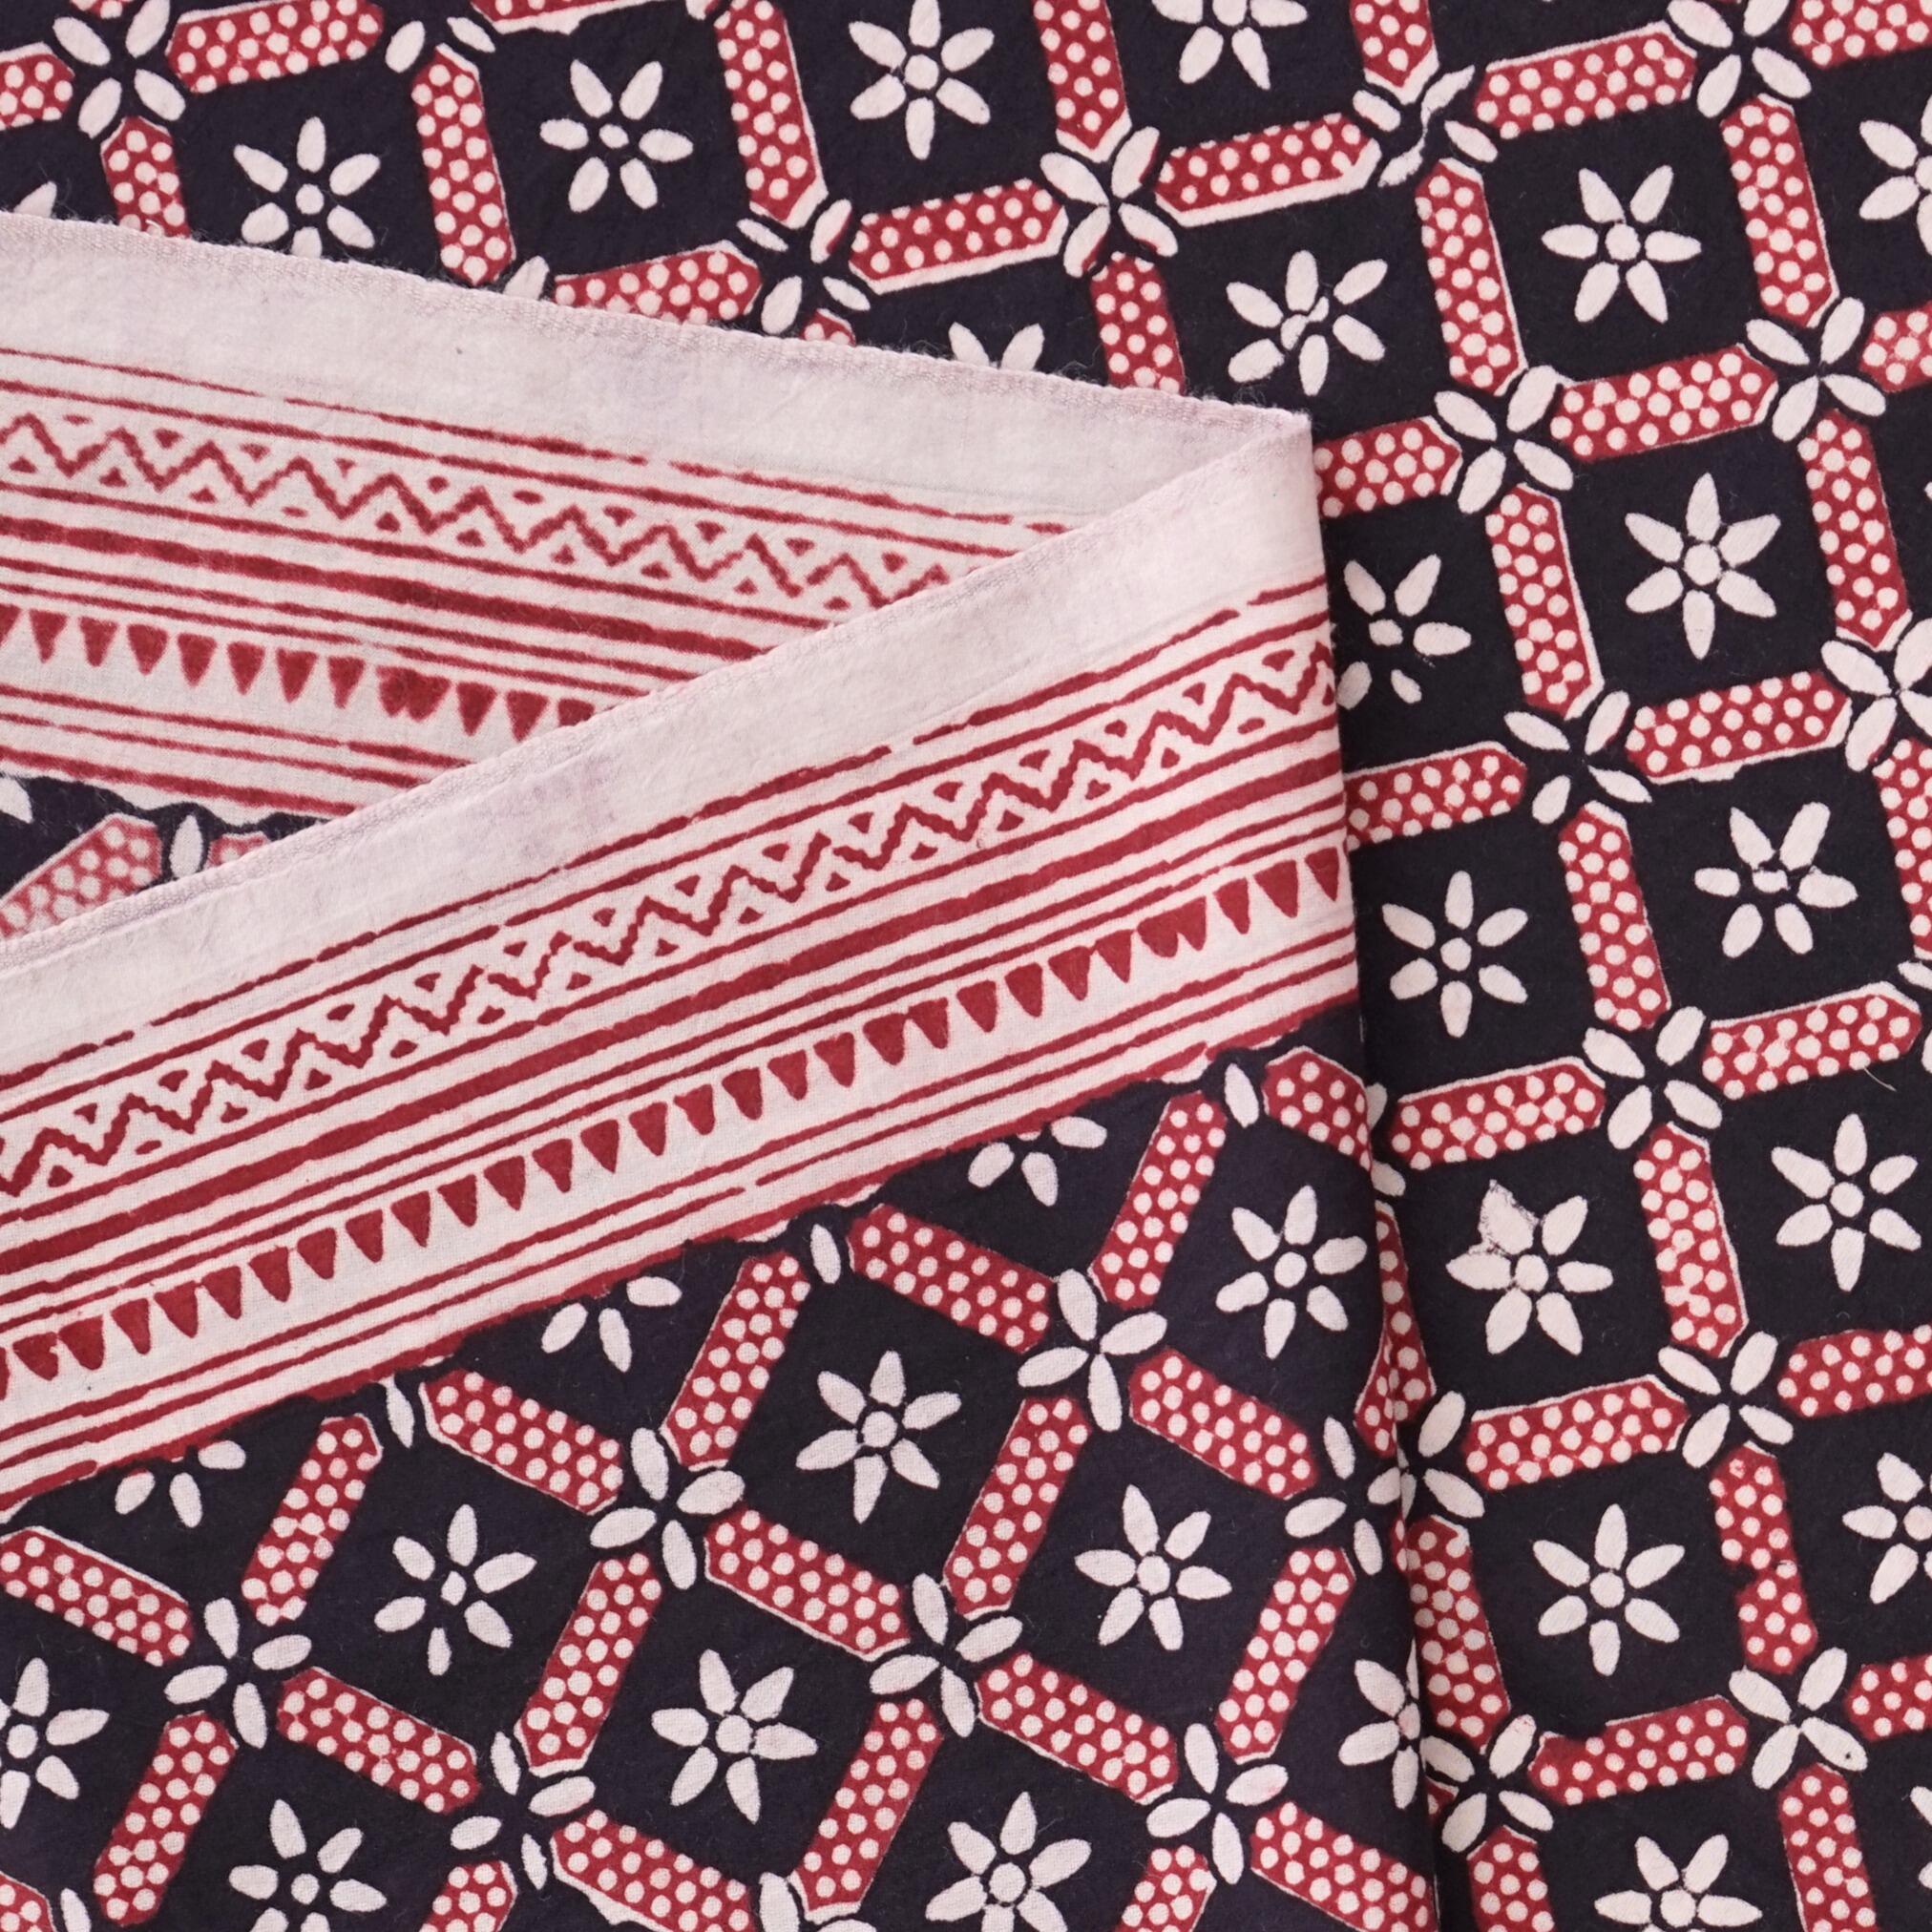 100% Block -Printed Cotton Fabric From India - Barley Design - Iron Rust Black & Alizarin Red Dyes - Selvedge